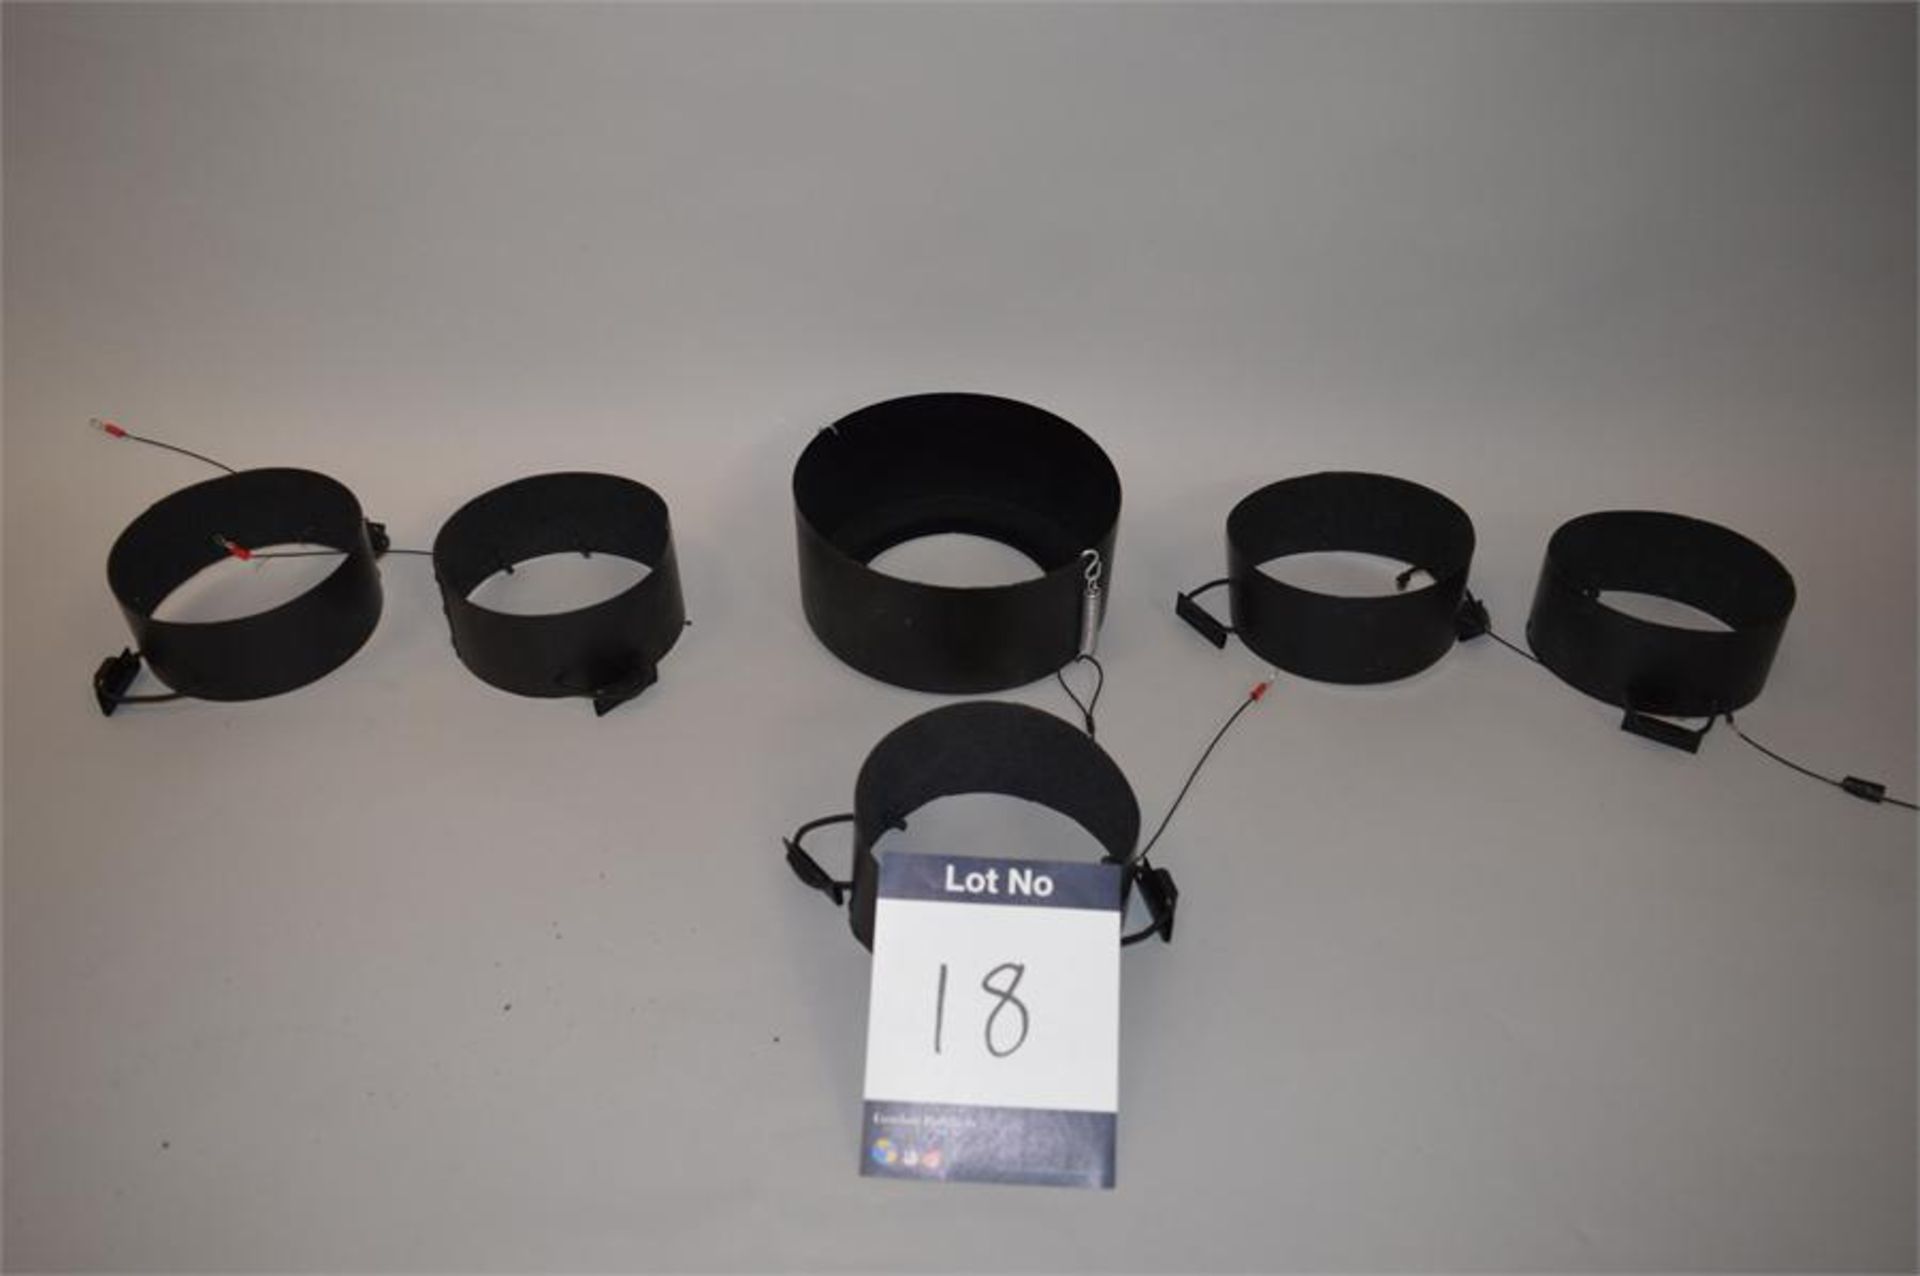 21 x Varilite, VL2000 Narrow 2" Short Top Hats and 2 x Varilite VL2000 Wide Top Hats, as lotted - Image 4 of 4